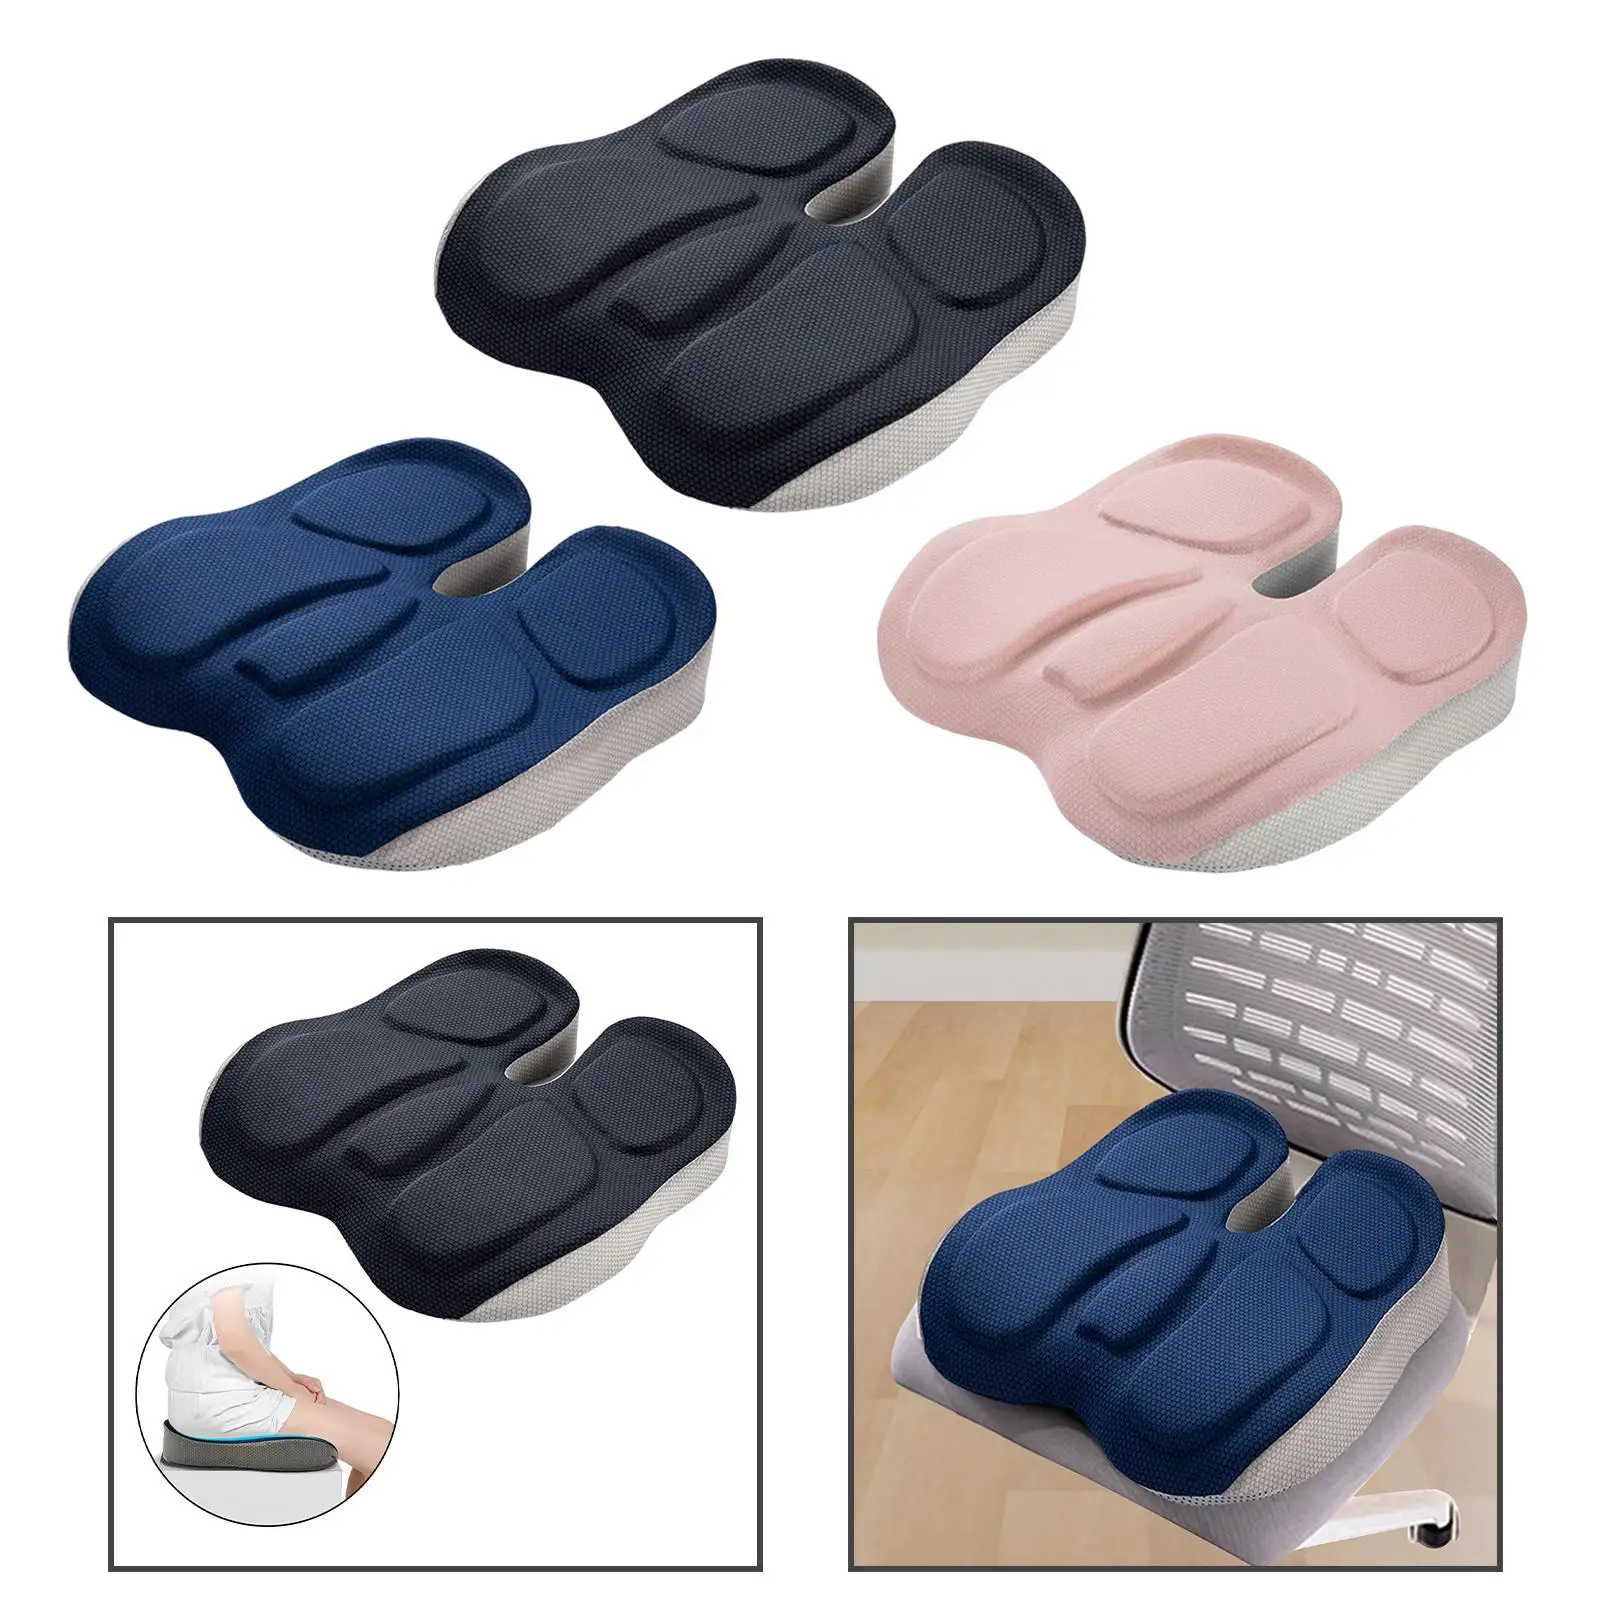 Memory Foam Seat Cushion, Anti Slip,Comfort Chair Pad for Travel Driving Computer Desk Chair Office Chair